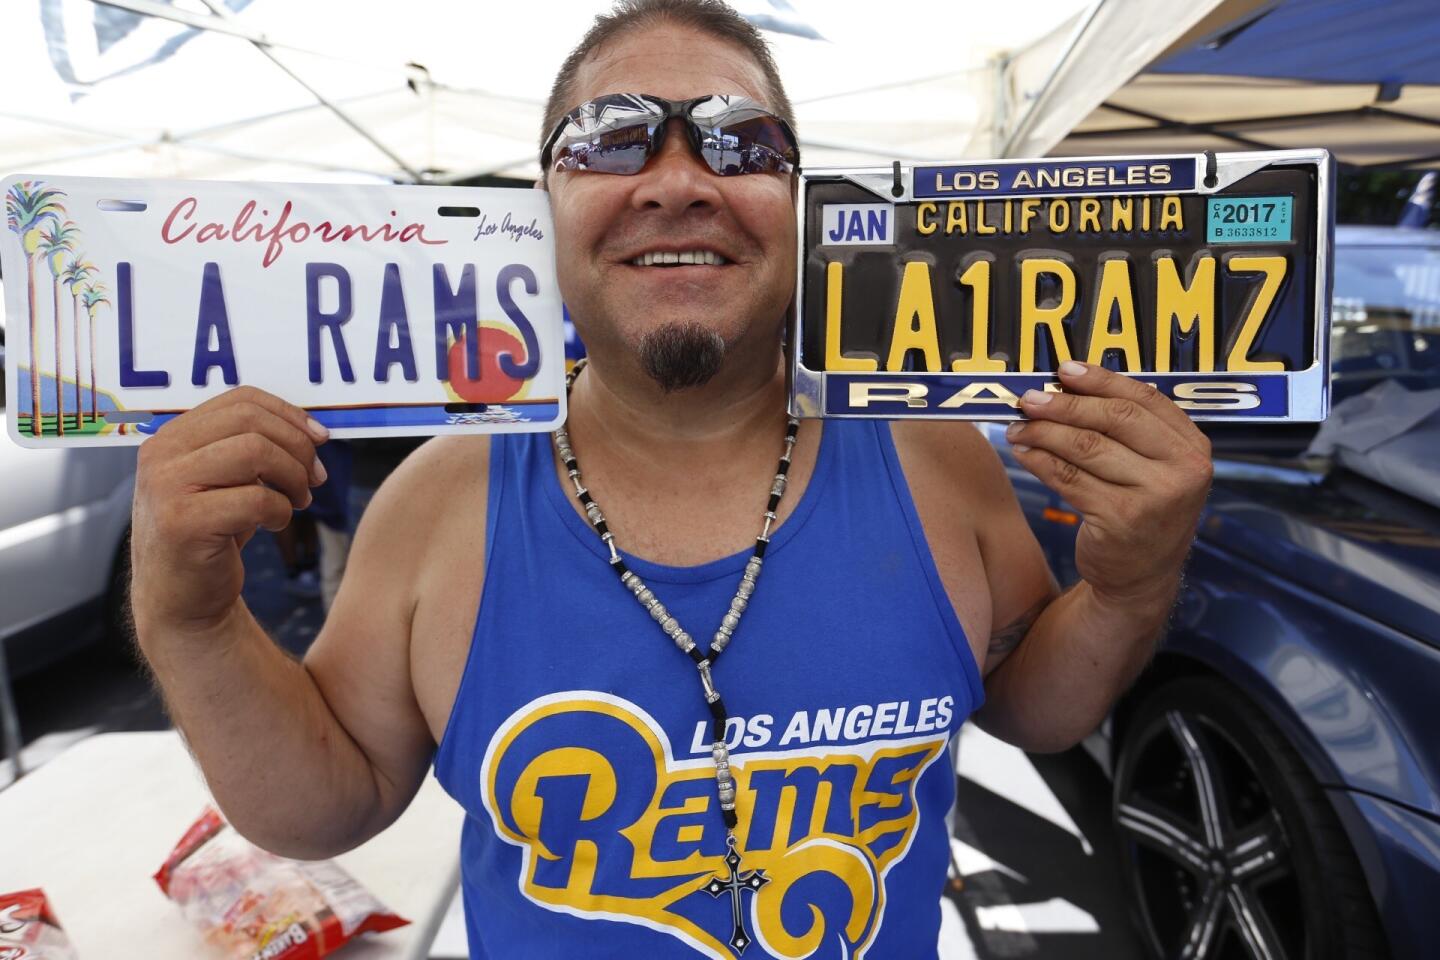 Vince Cadena, 50, of Huntington Park said he is thrilled that the Rams are back in Los Angeles. He has been a fan since the '70s.